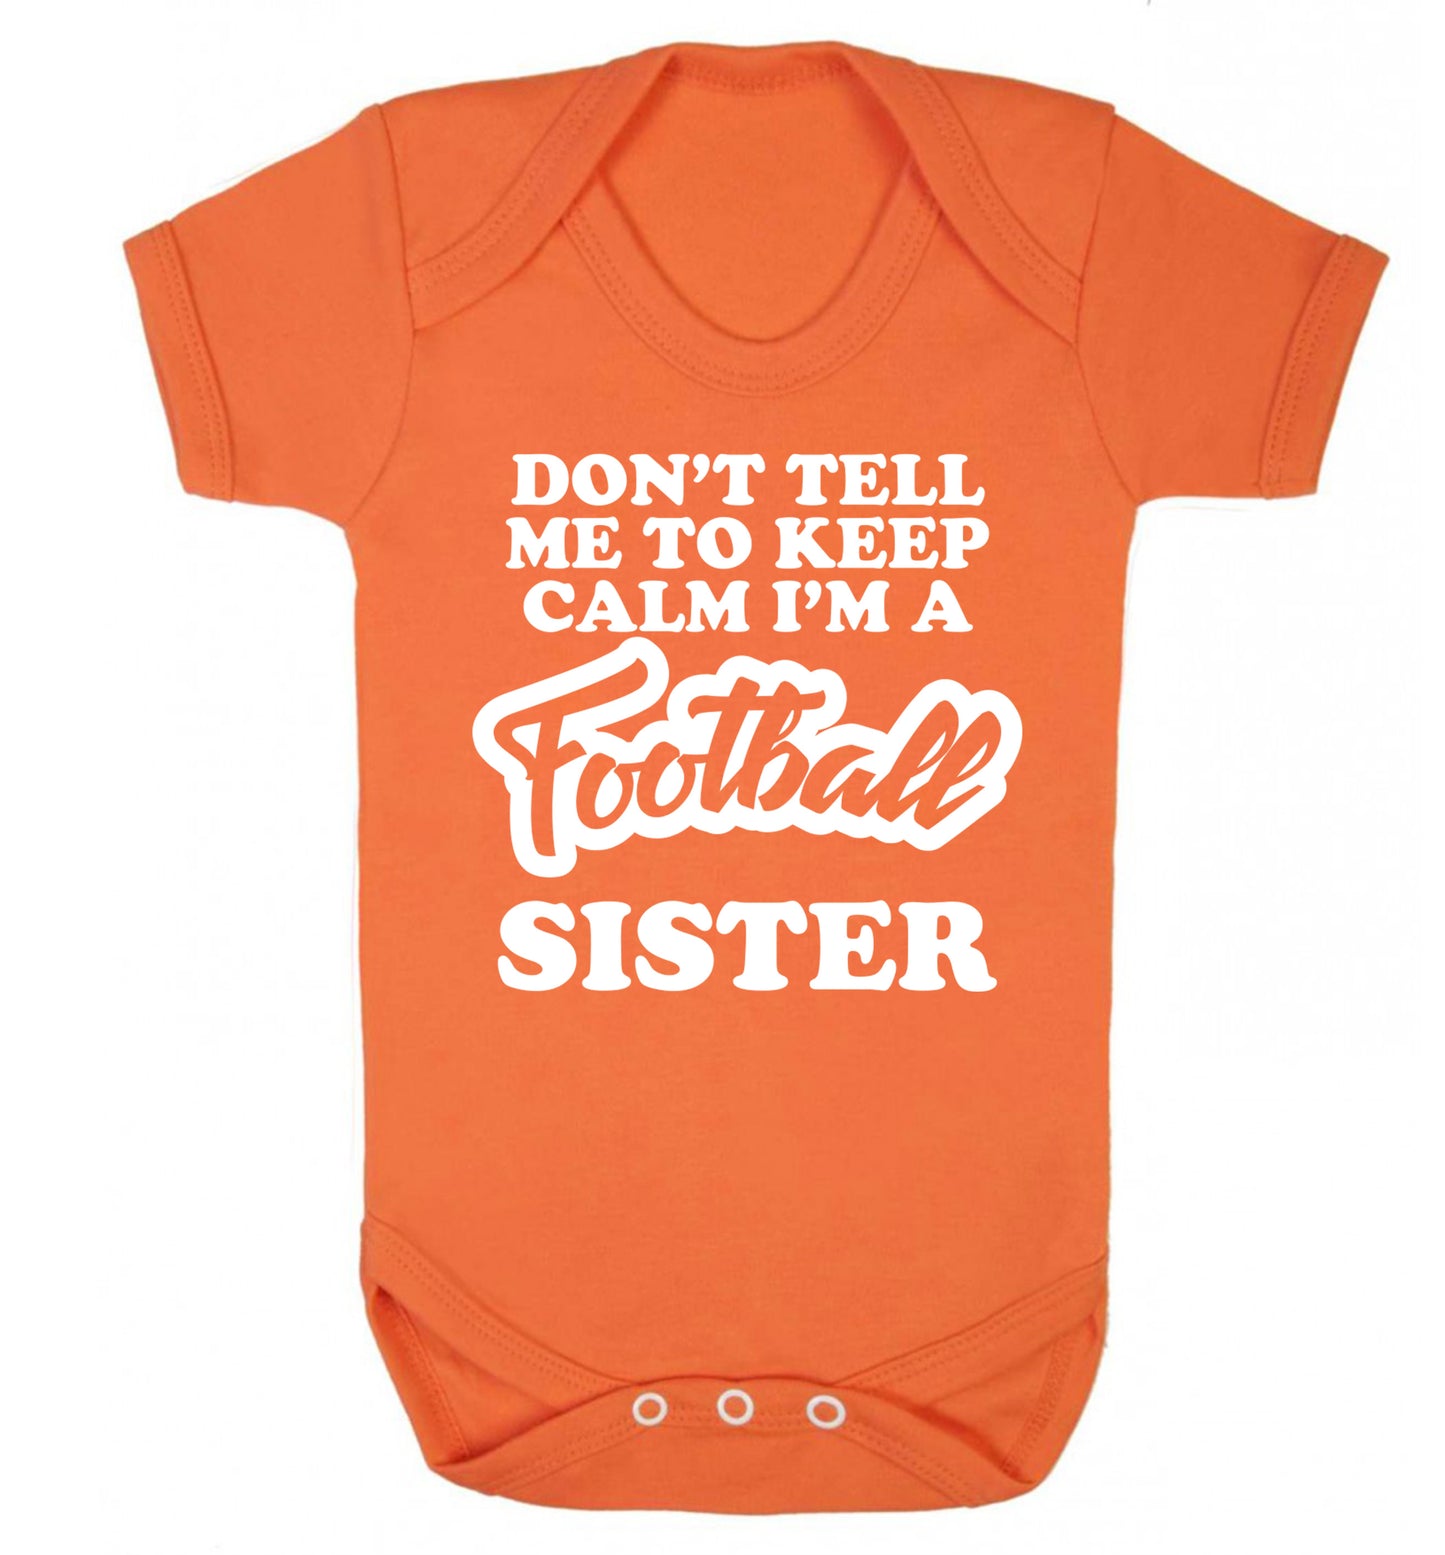 Don't tell me to keep calm I'm a football sister Baby Vest orange 18-24 months